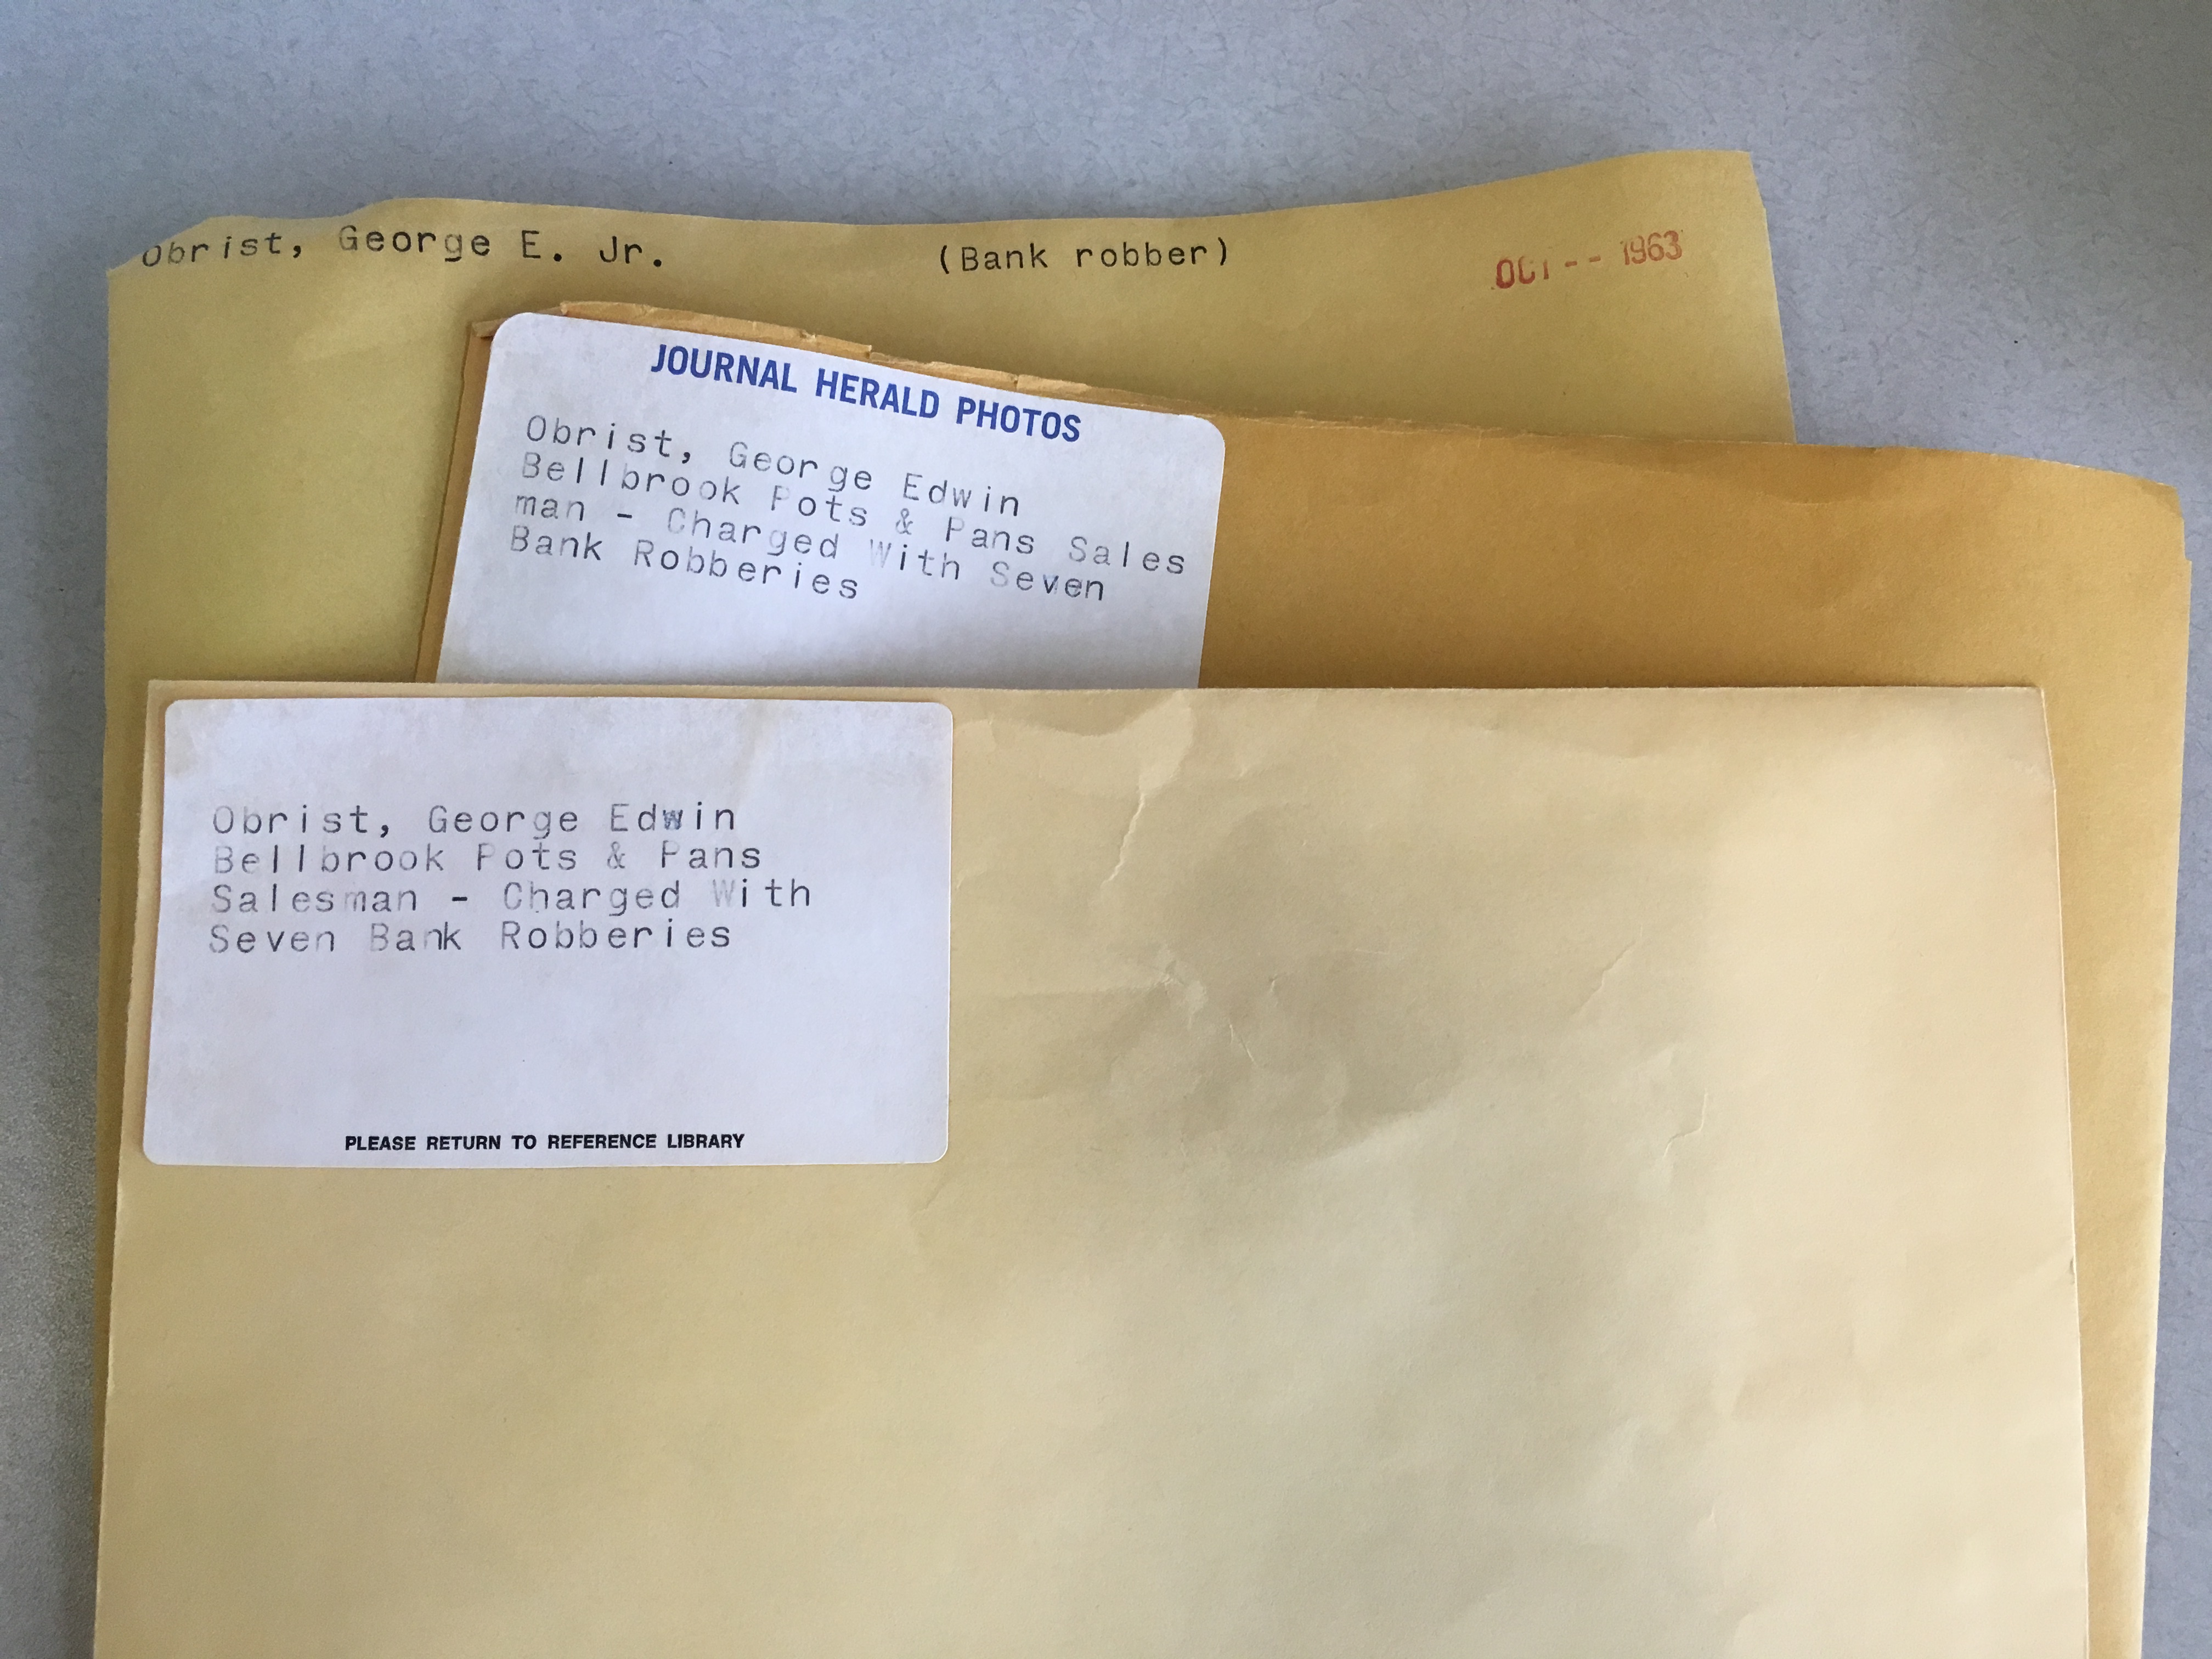 Files about George E. Obrist, Jr., from the DDN Archive